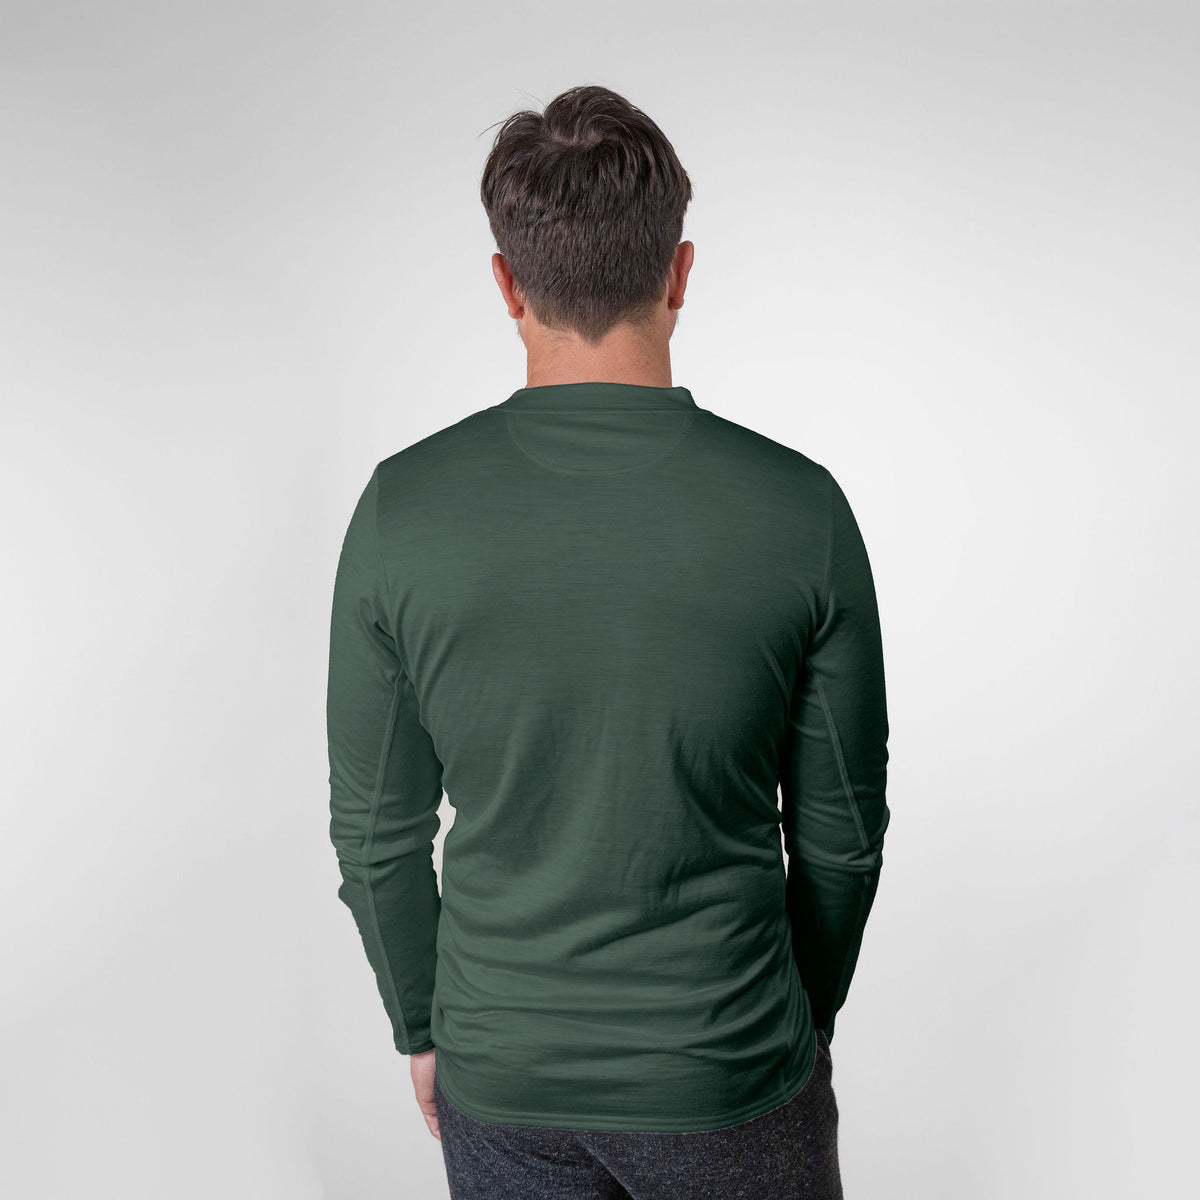 A man facing away from the camera against a white background. He is wearing a forest green Alpacas of Montana lightweight athletic activewear outerwear breathable moisture wicking antimicrobial soft comfortable exercise long alpaca men&#39;s performance tee for running sports exercise work out hiking climbing camping hunting skiing biking